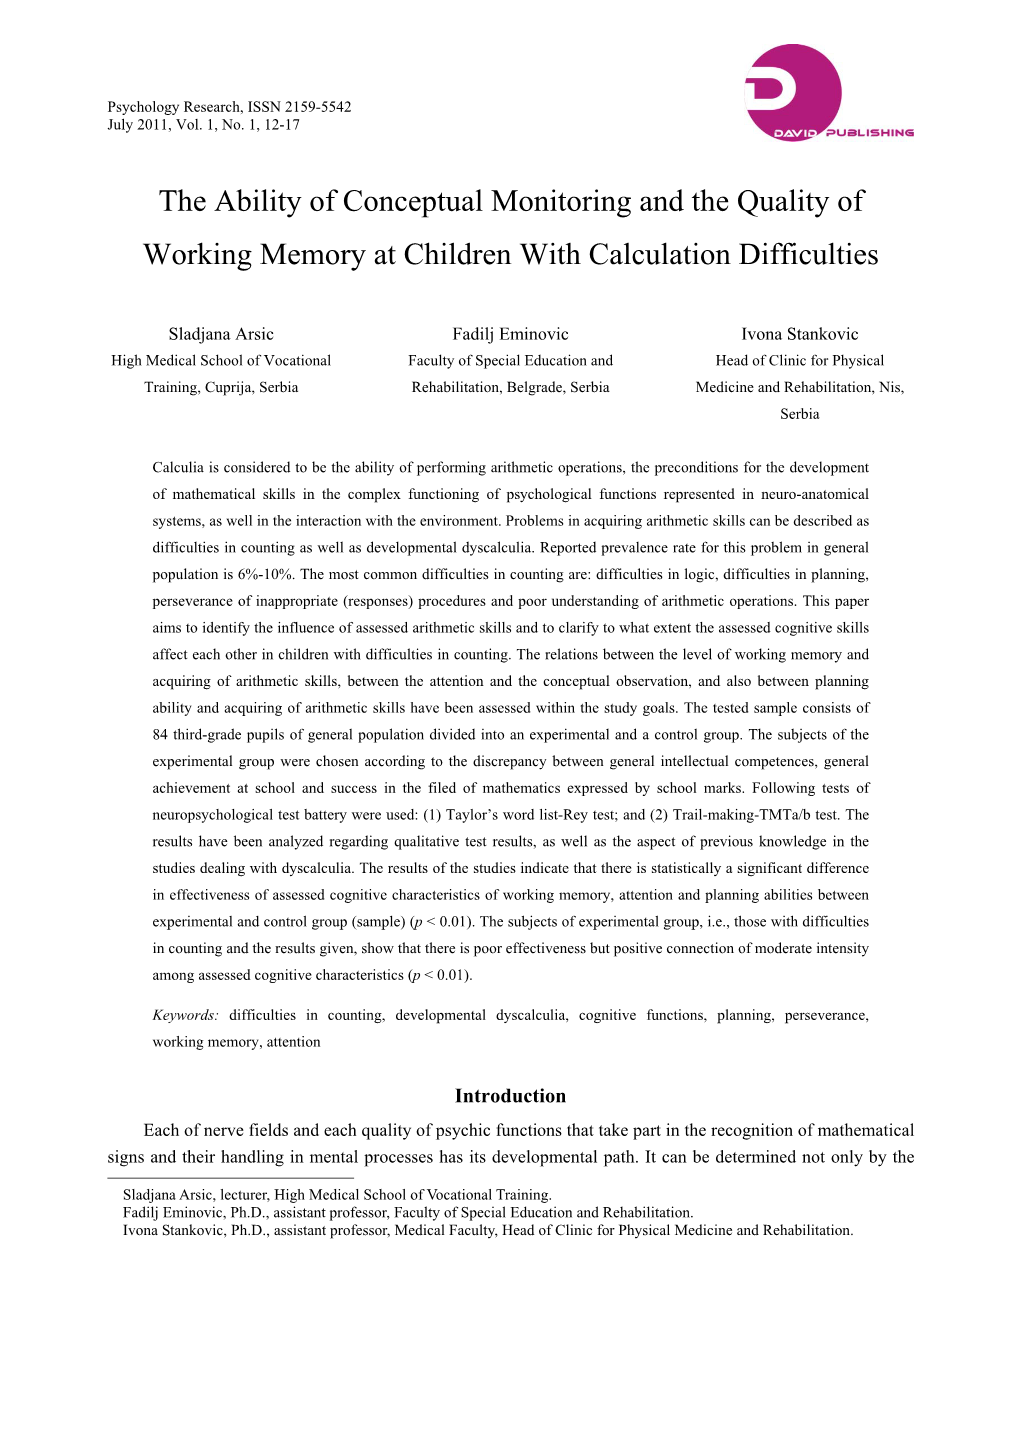 The Ability of Conceptual Monitoring and the Quality of Working Memory at Children with Calculation Difficulties